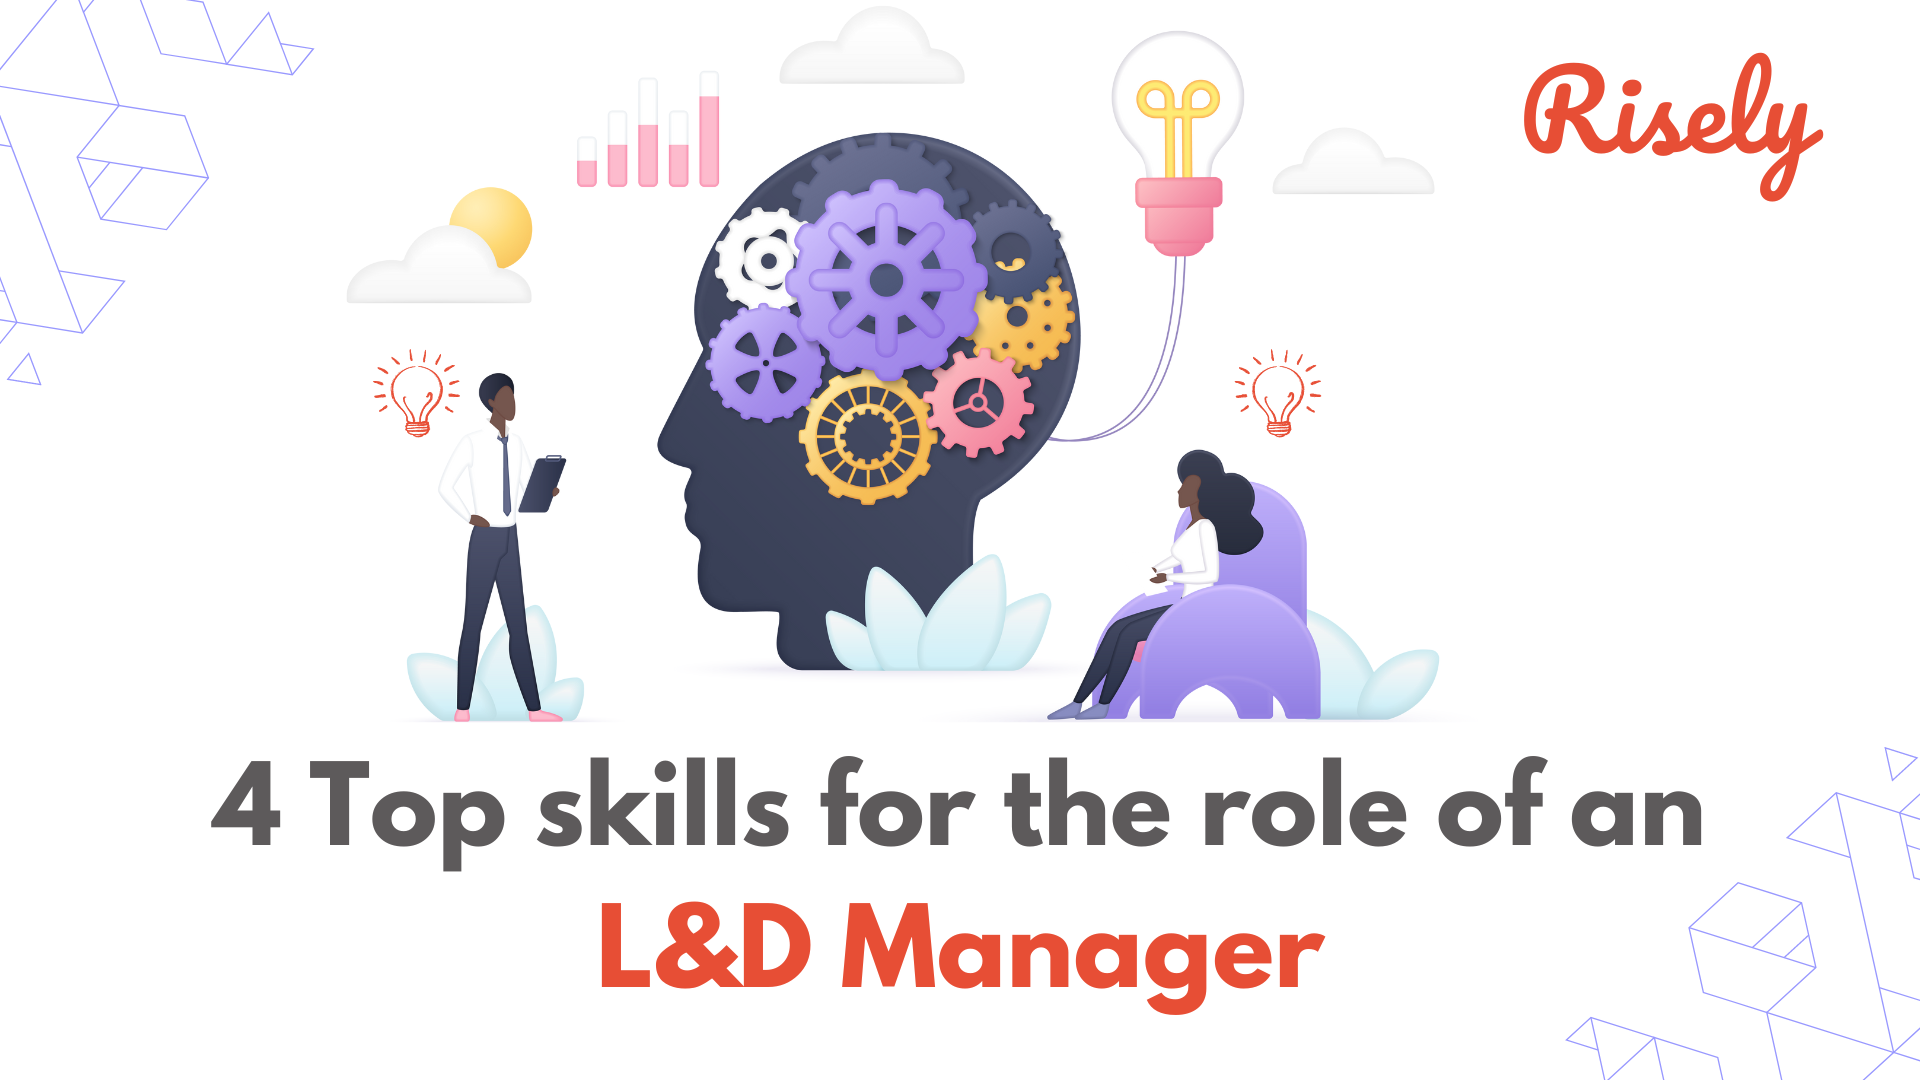 4 Top skills for the role of an L&D Manager